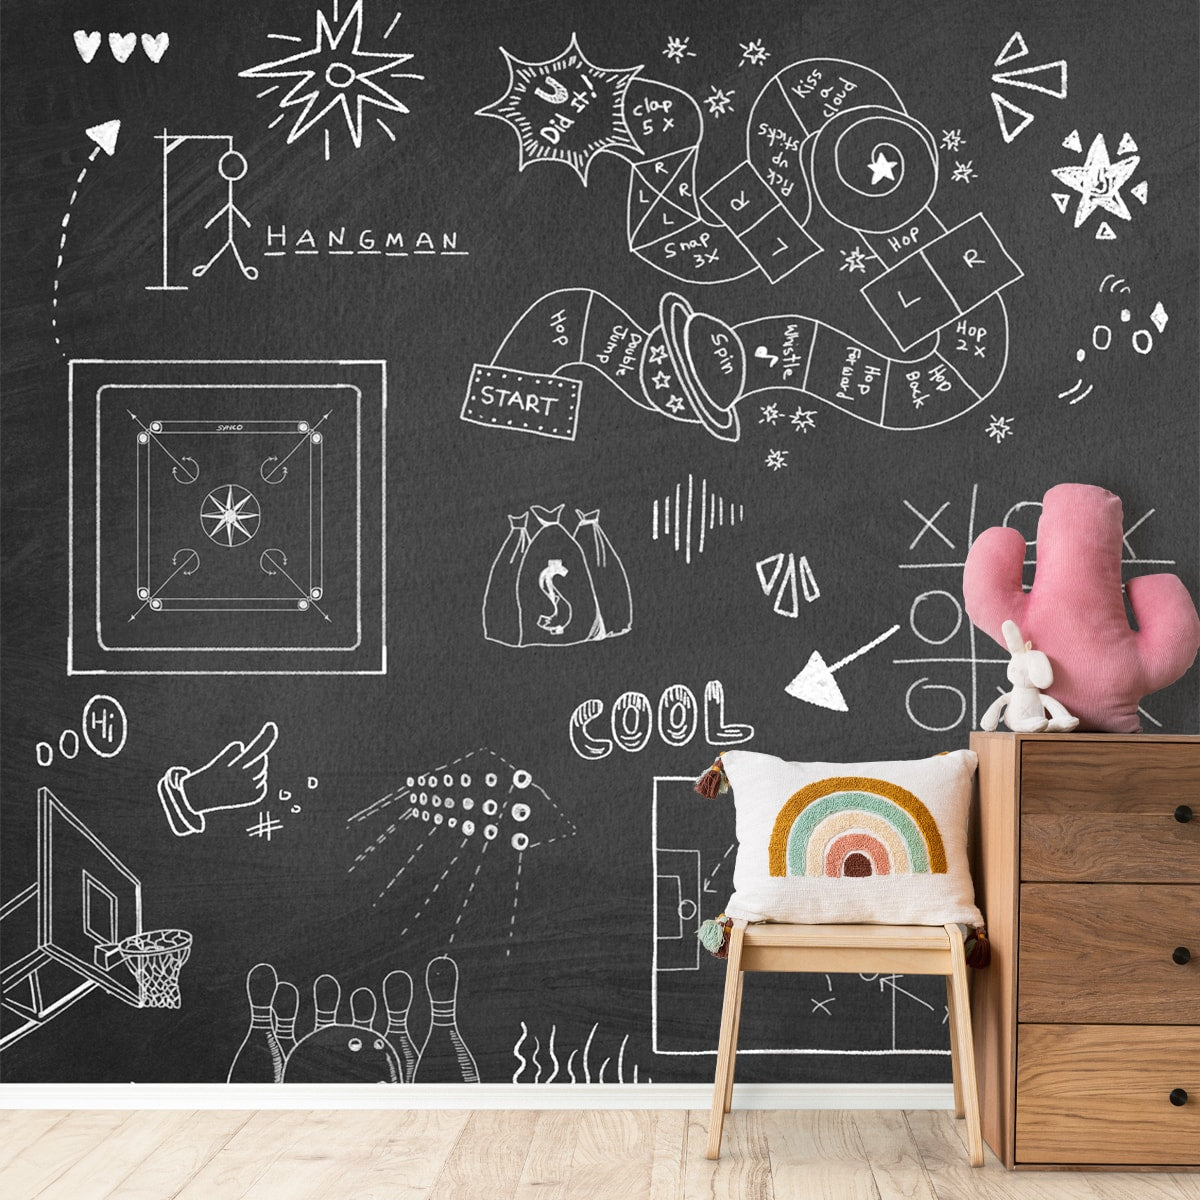 Gameboard Gallery Playful Wallpaper Customised for Kids